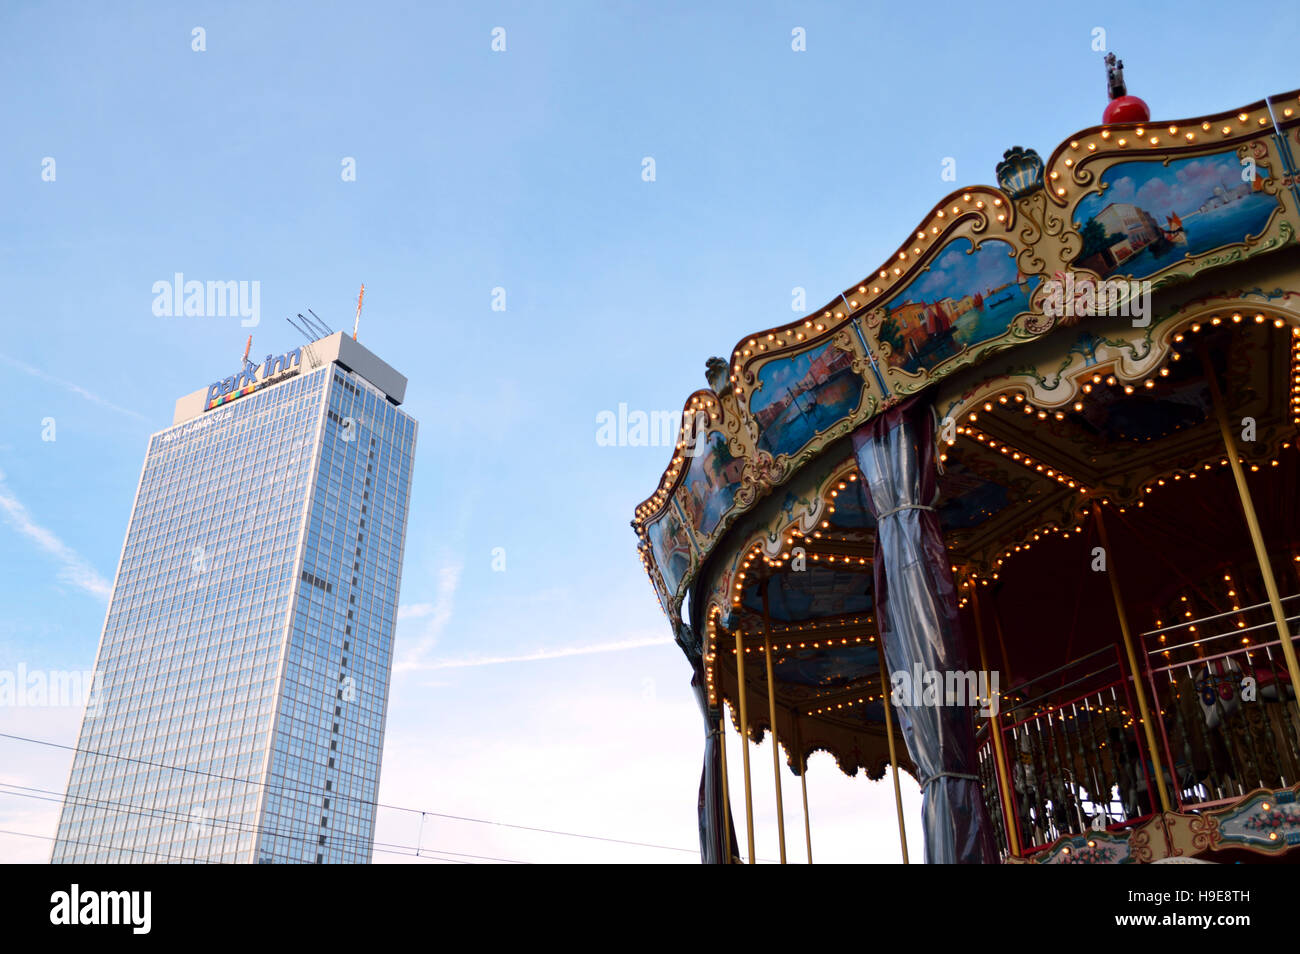 The Park Inn Hotel at Berlin Alexanderplatz with a carousel in the foreground, Germany Stock Photo